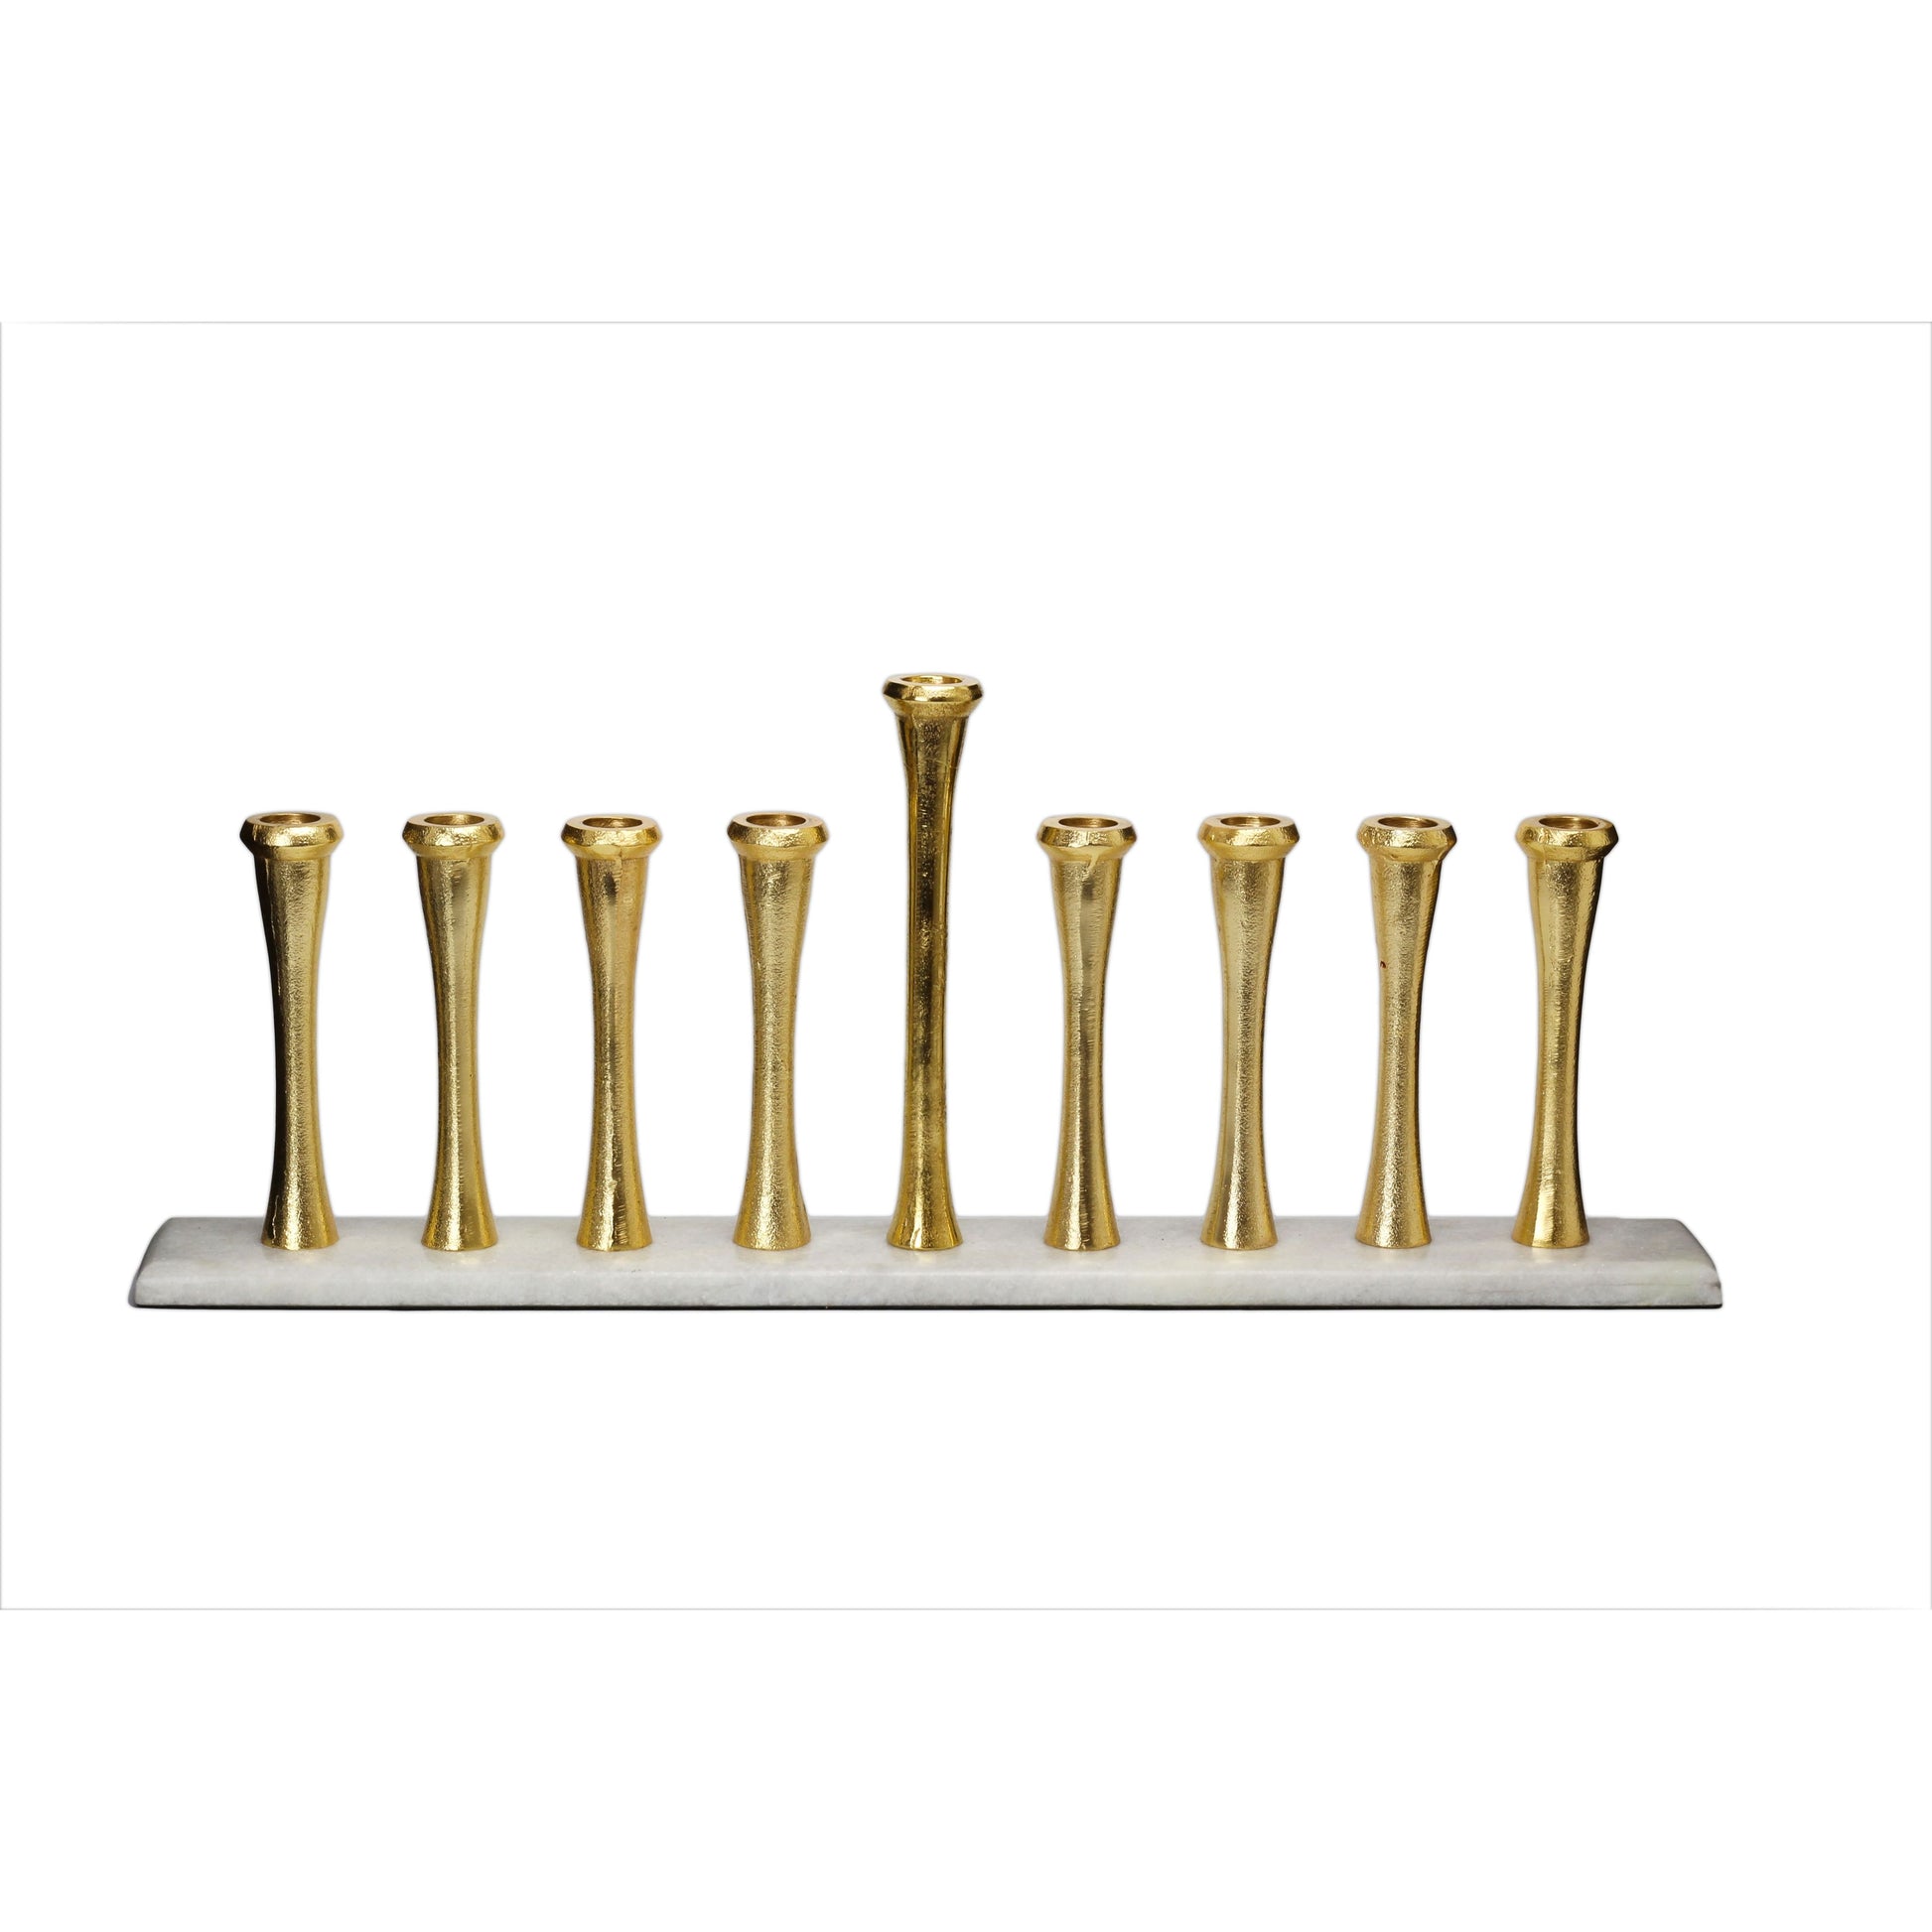 Classic Touch Decor Gold Menorah On White Marble Base, 9" x 22" by Classic Touch Decor